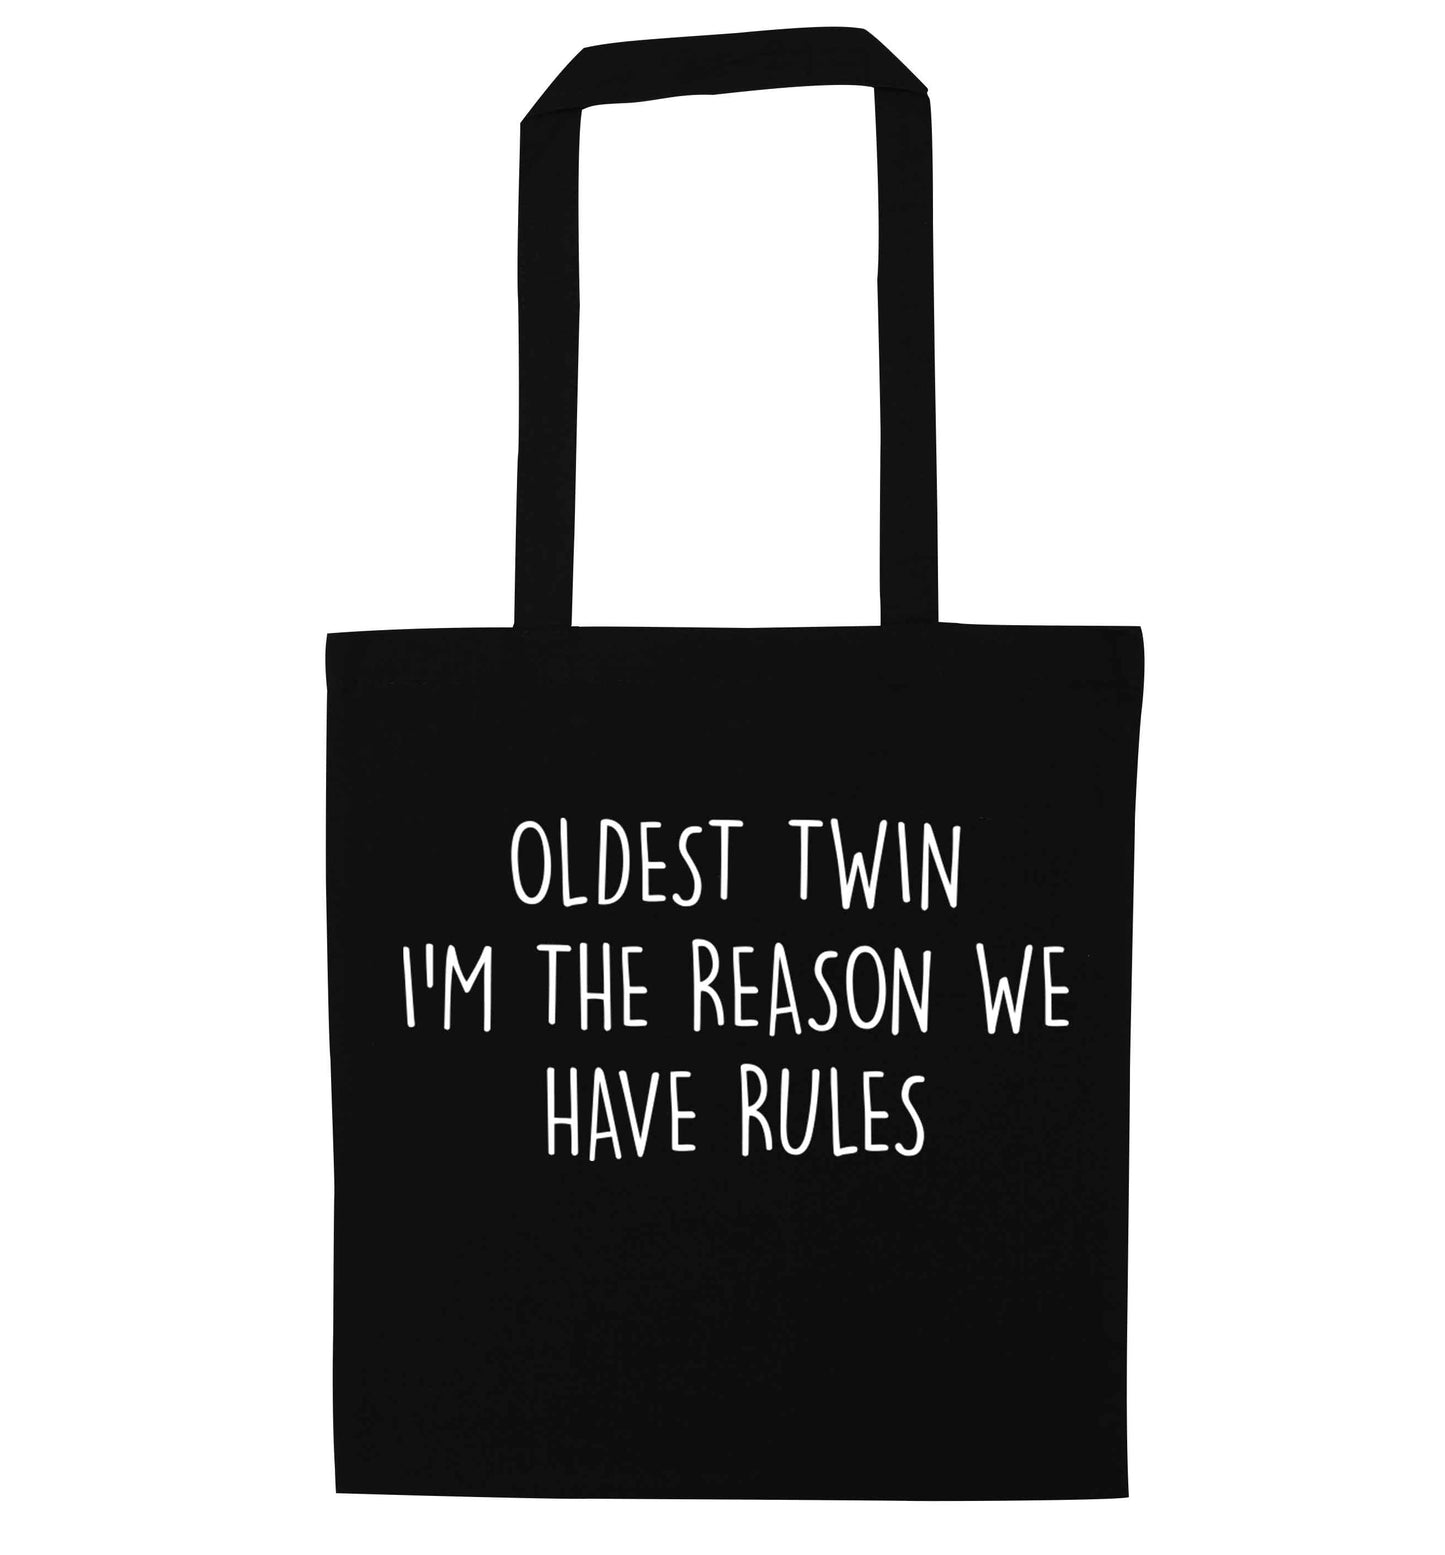 Oldest twin I'm the reason we have rules black tote bag